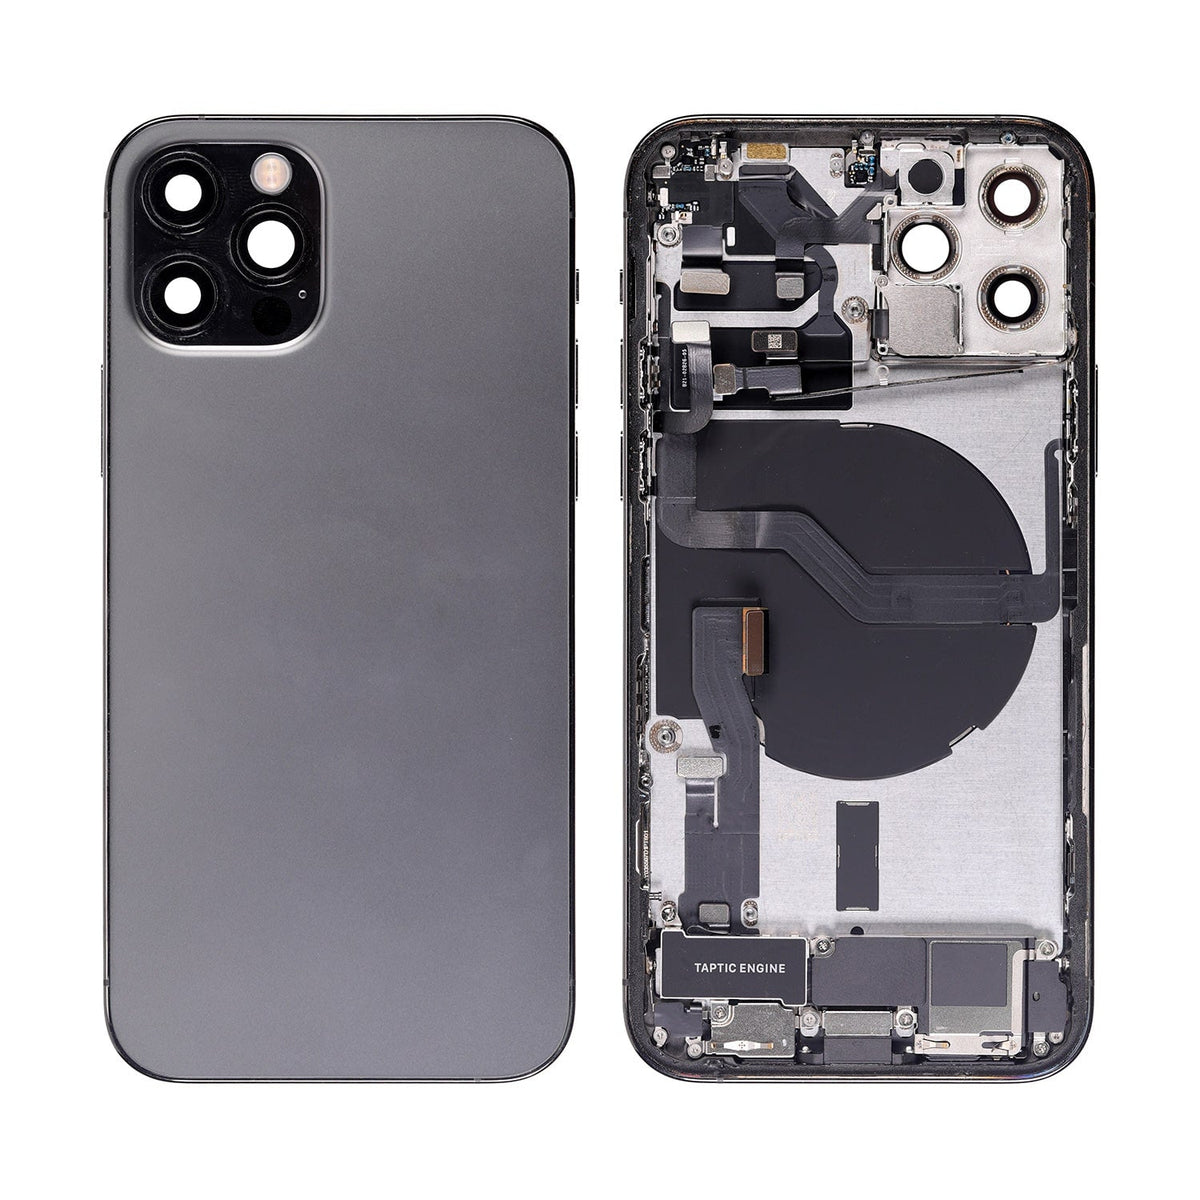 GRAPHITE BACK COVER FULL ASSEMBLY FOR IPHONE 12 PRO